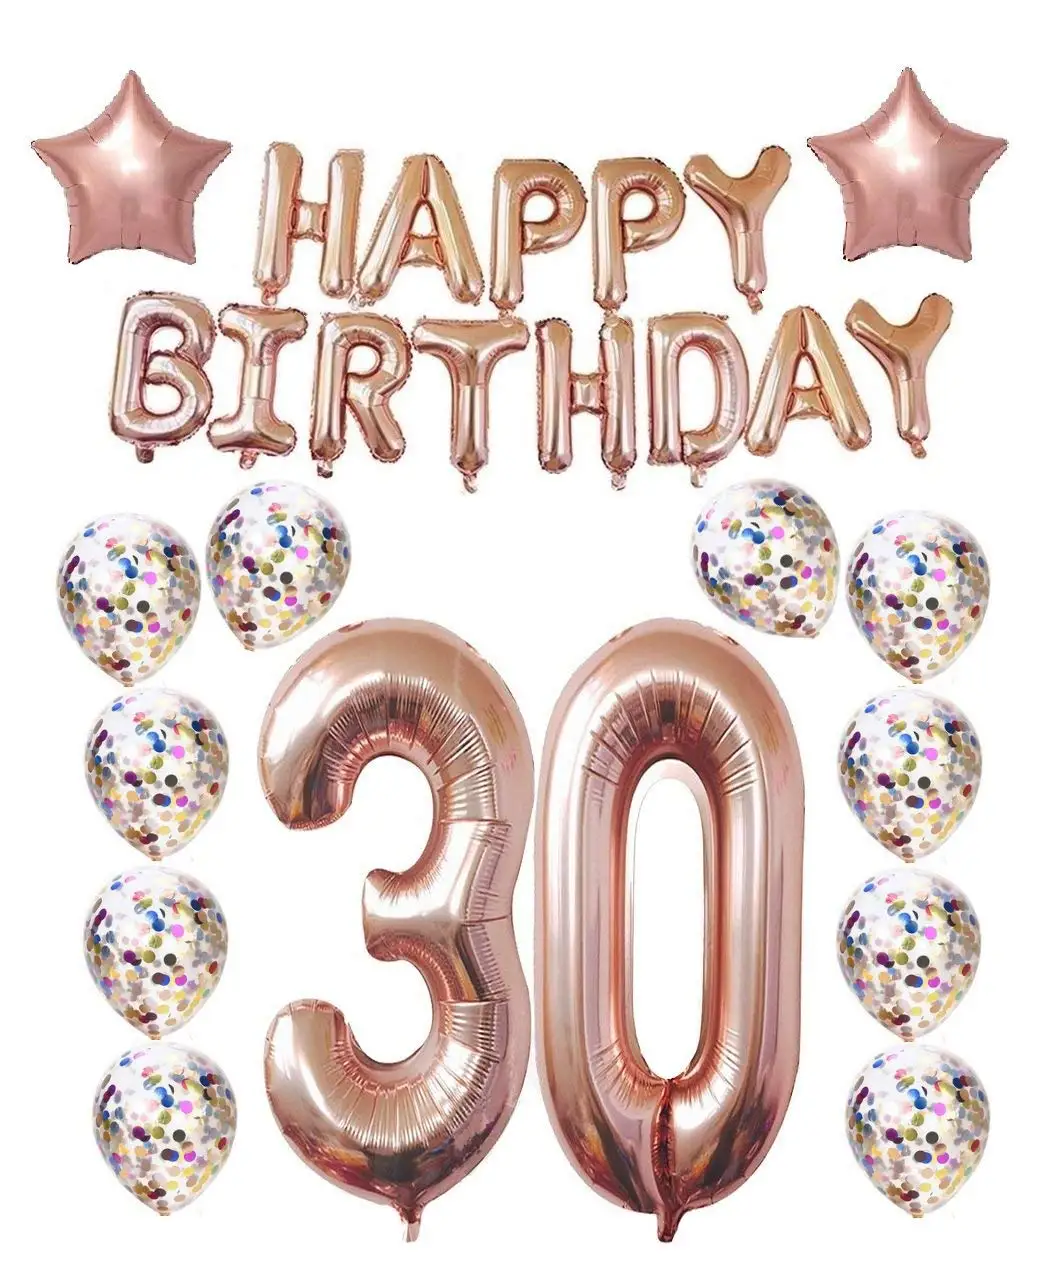 Cheap Happy 30th Birthday Find Happy 30th Birthday Deals On Line At Alibaba Com